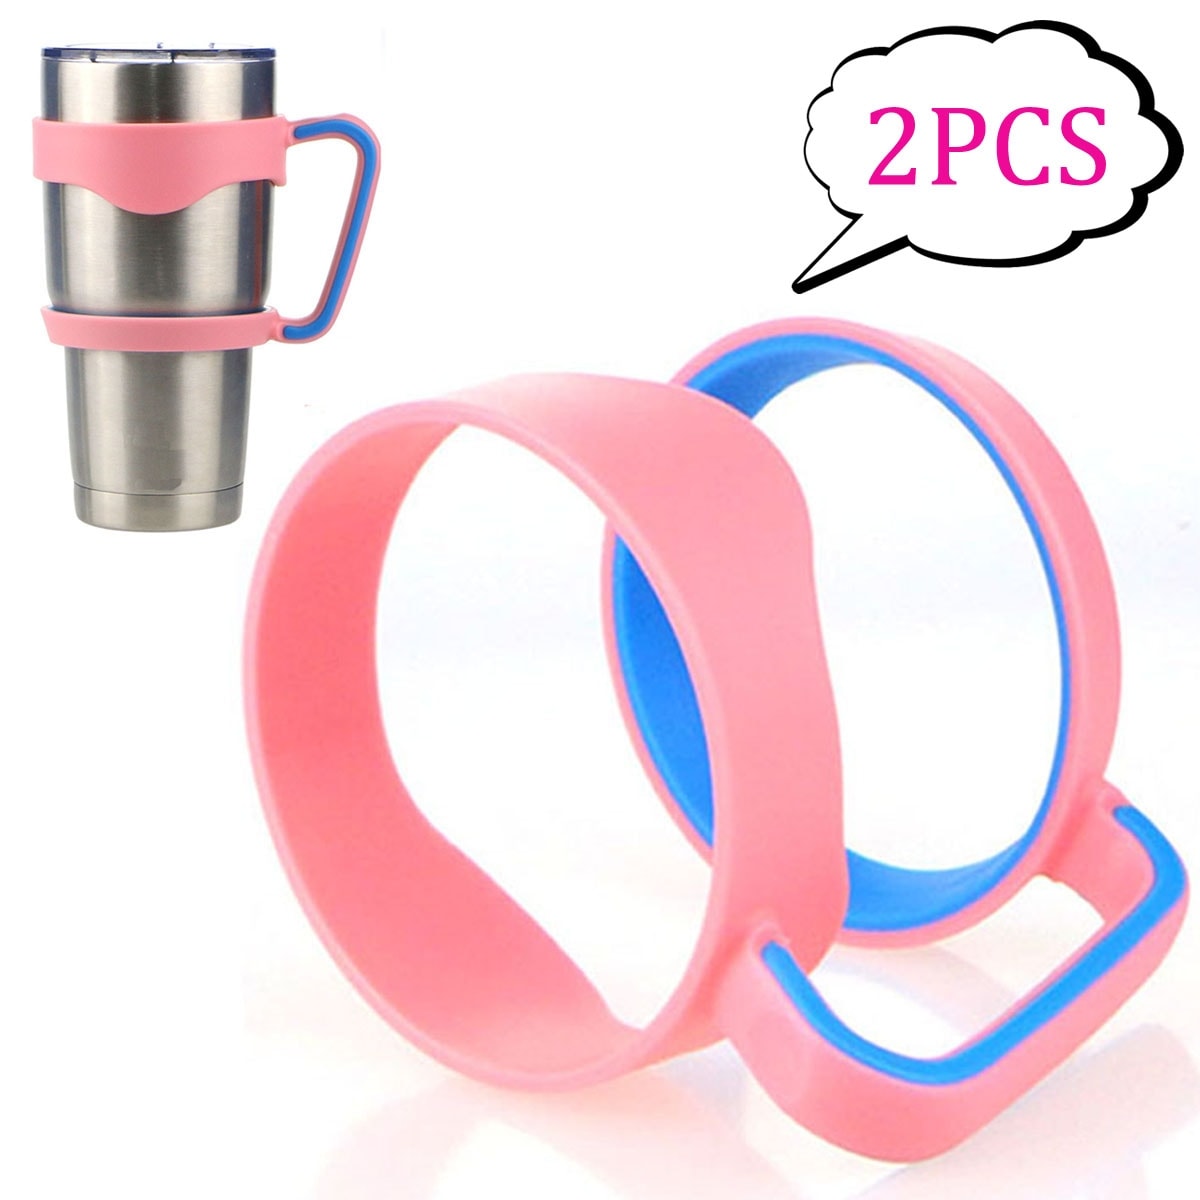 Image 2PCS 30 oz Tumbler Handles for Rtic YETI Rambler 30 oz (Handle Only)  Pink and Blue